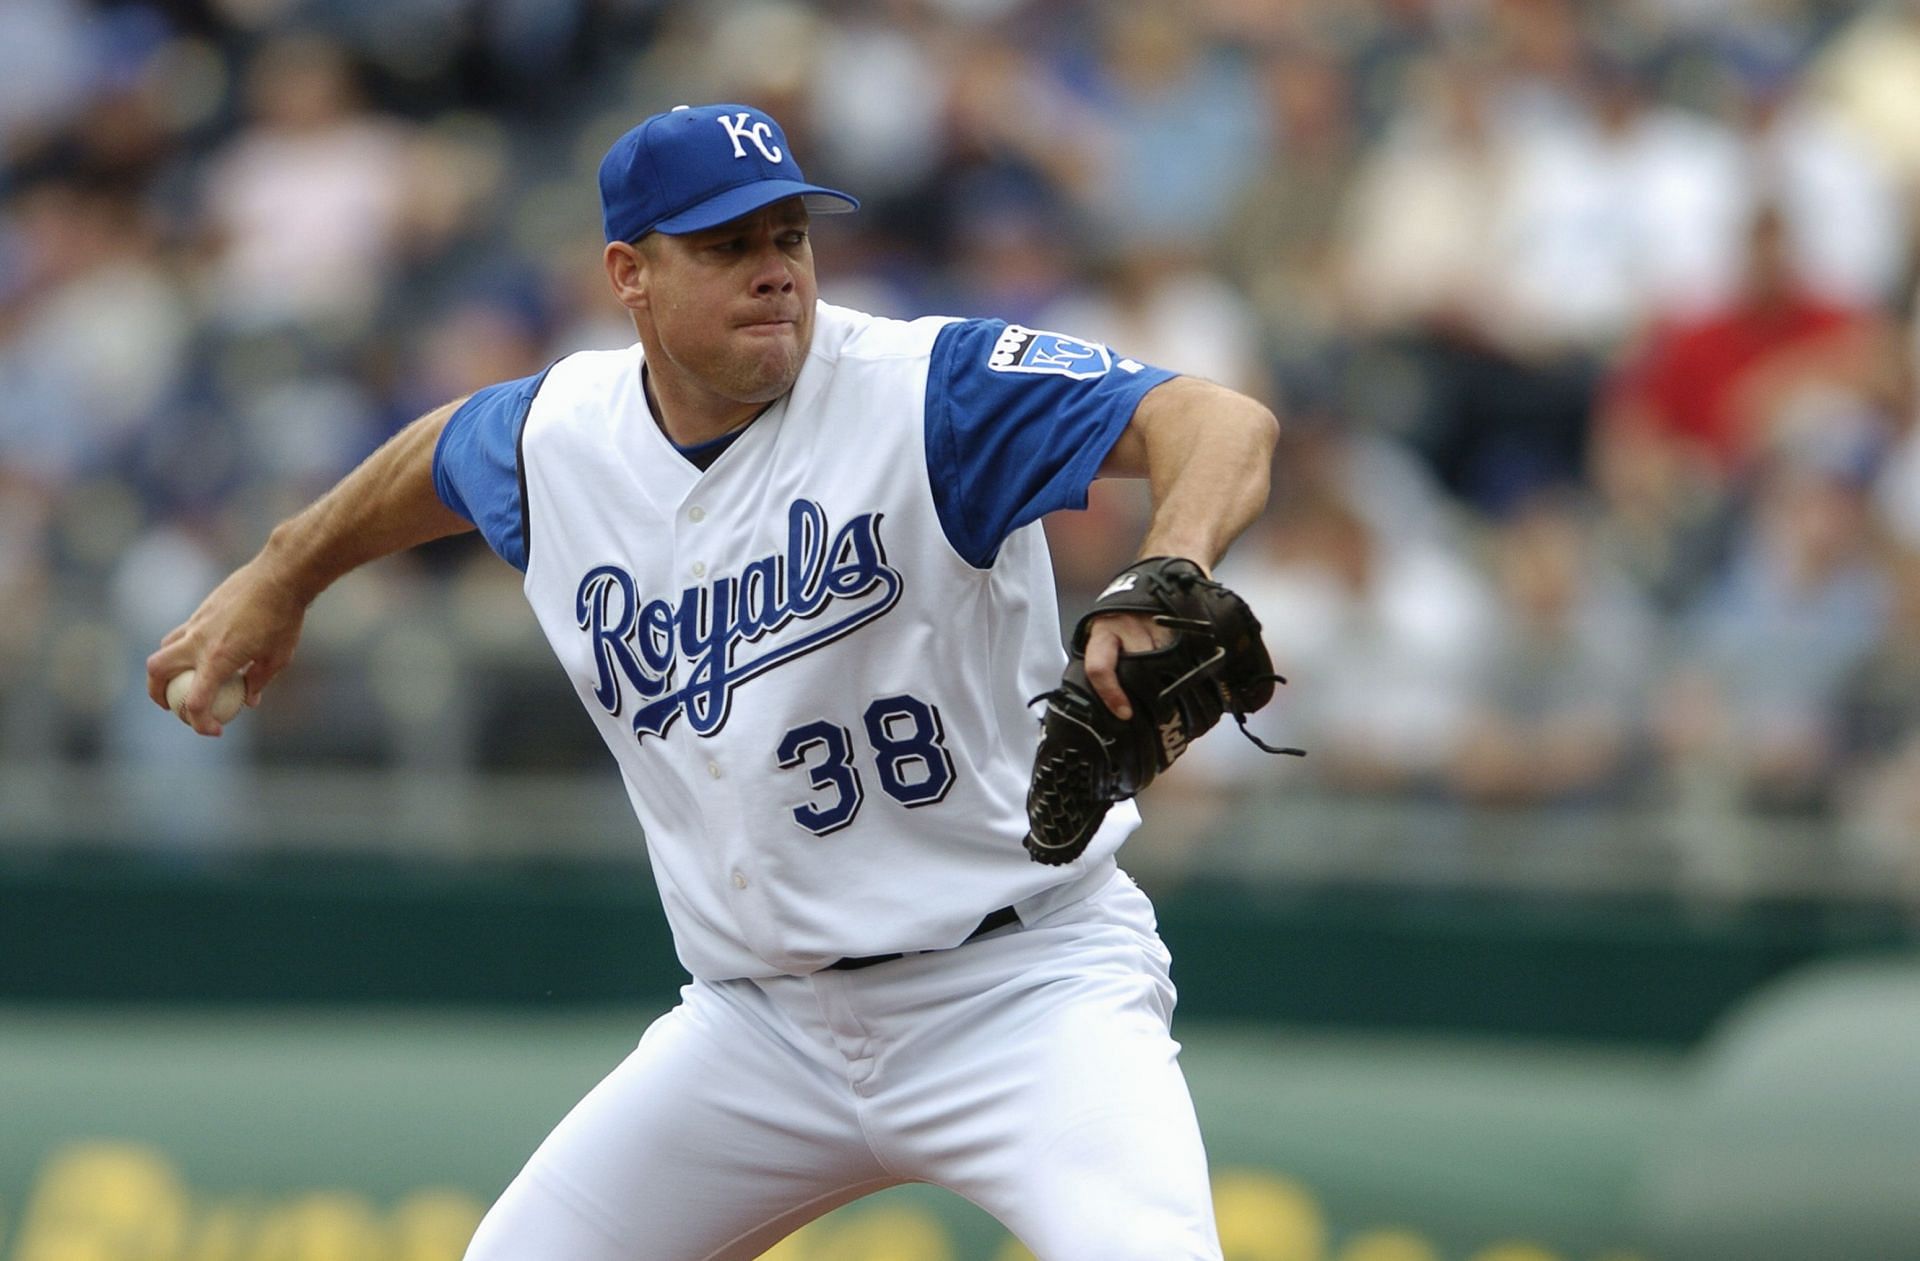 Pitcher Jason Grimsley #38 of the Kansas City Royals delivers against the Toronto Blue Jays during the game at Kauffman Stadium on May 12, 2004, in Kansas City, Missouri. The Royals won 4-3. (Photo by Larry W. Smith/Getty Images)